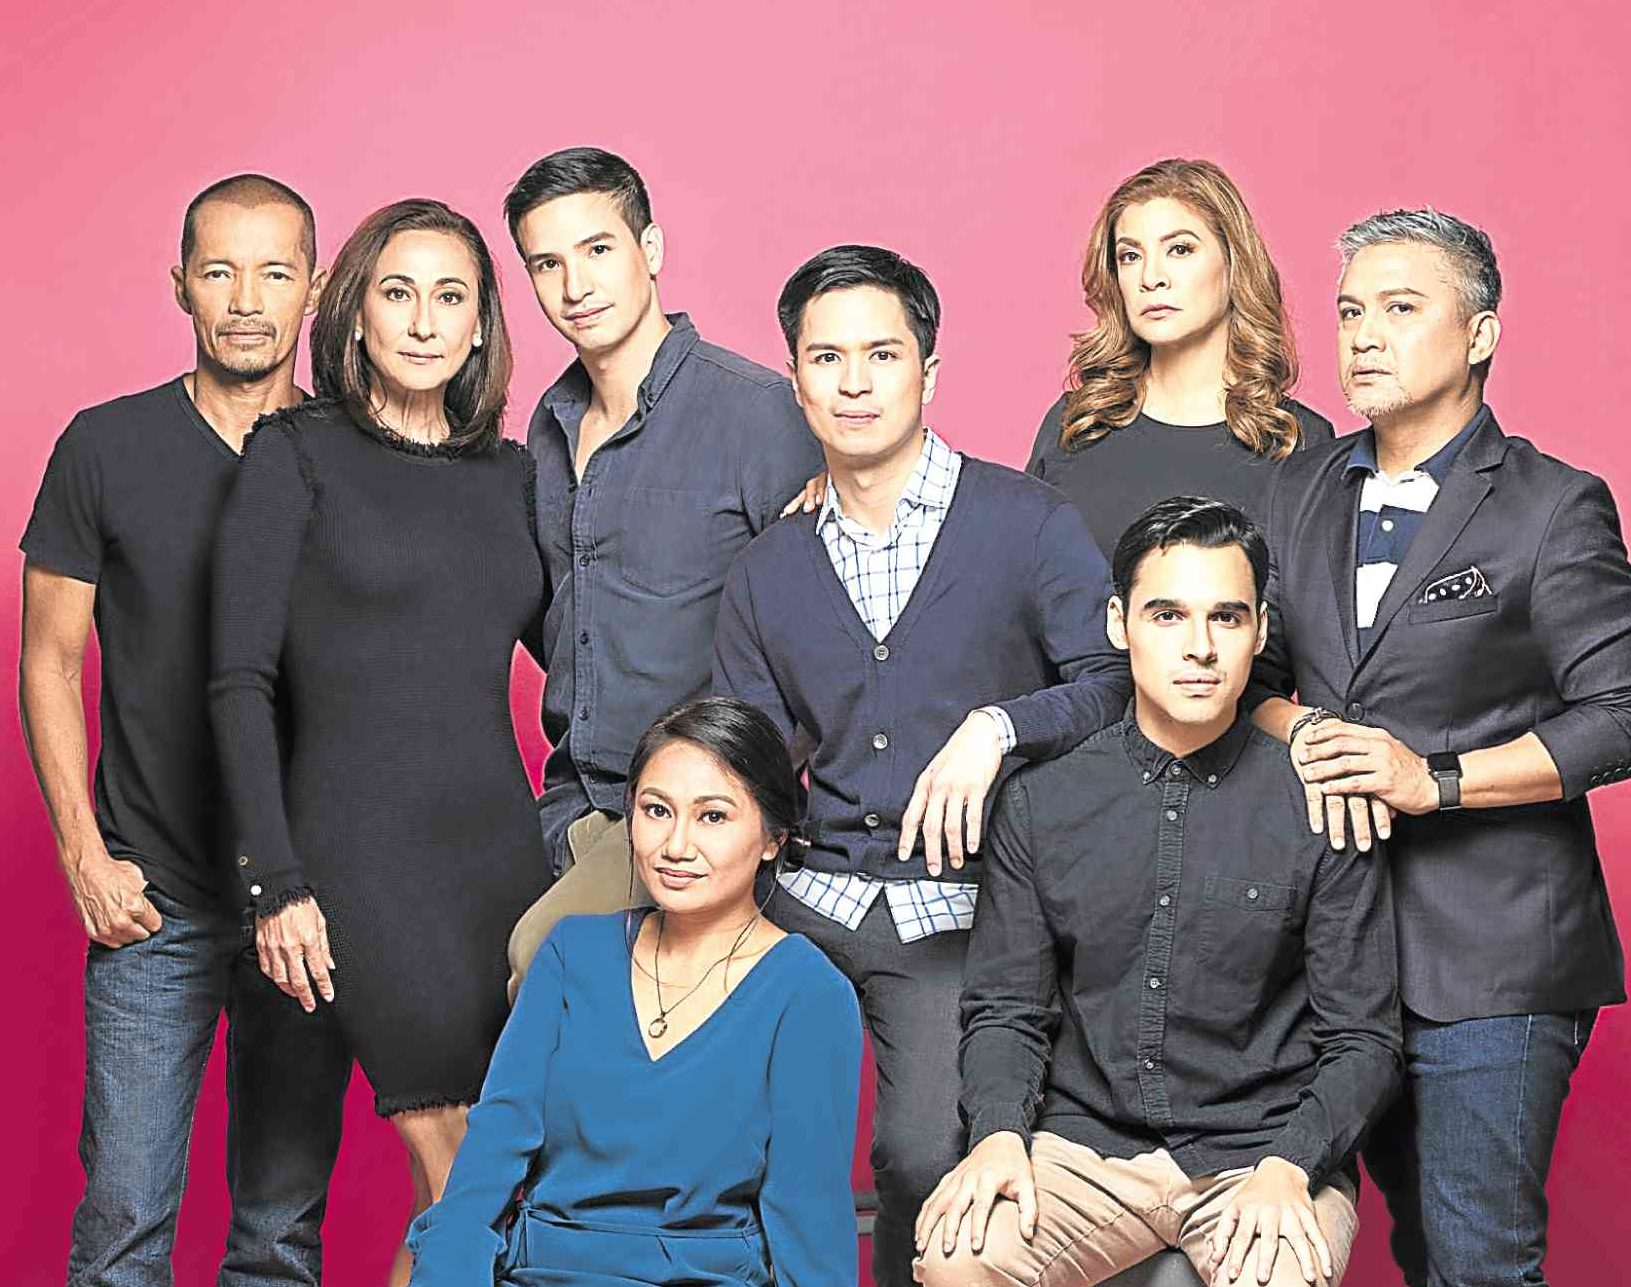 The cast of Atlantis Theatrical Entertainment Group’s “Angels in America: Millennium Approaches”: (standing, from left) Art Acuña, Cherie Gil, Markki Stroem, Topper Fabregas, Pinky Amador, Andoy Ranay; (seated) Angeli Bayani and Nelsito Gomez